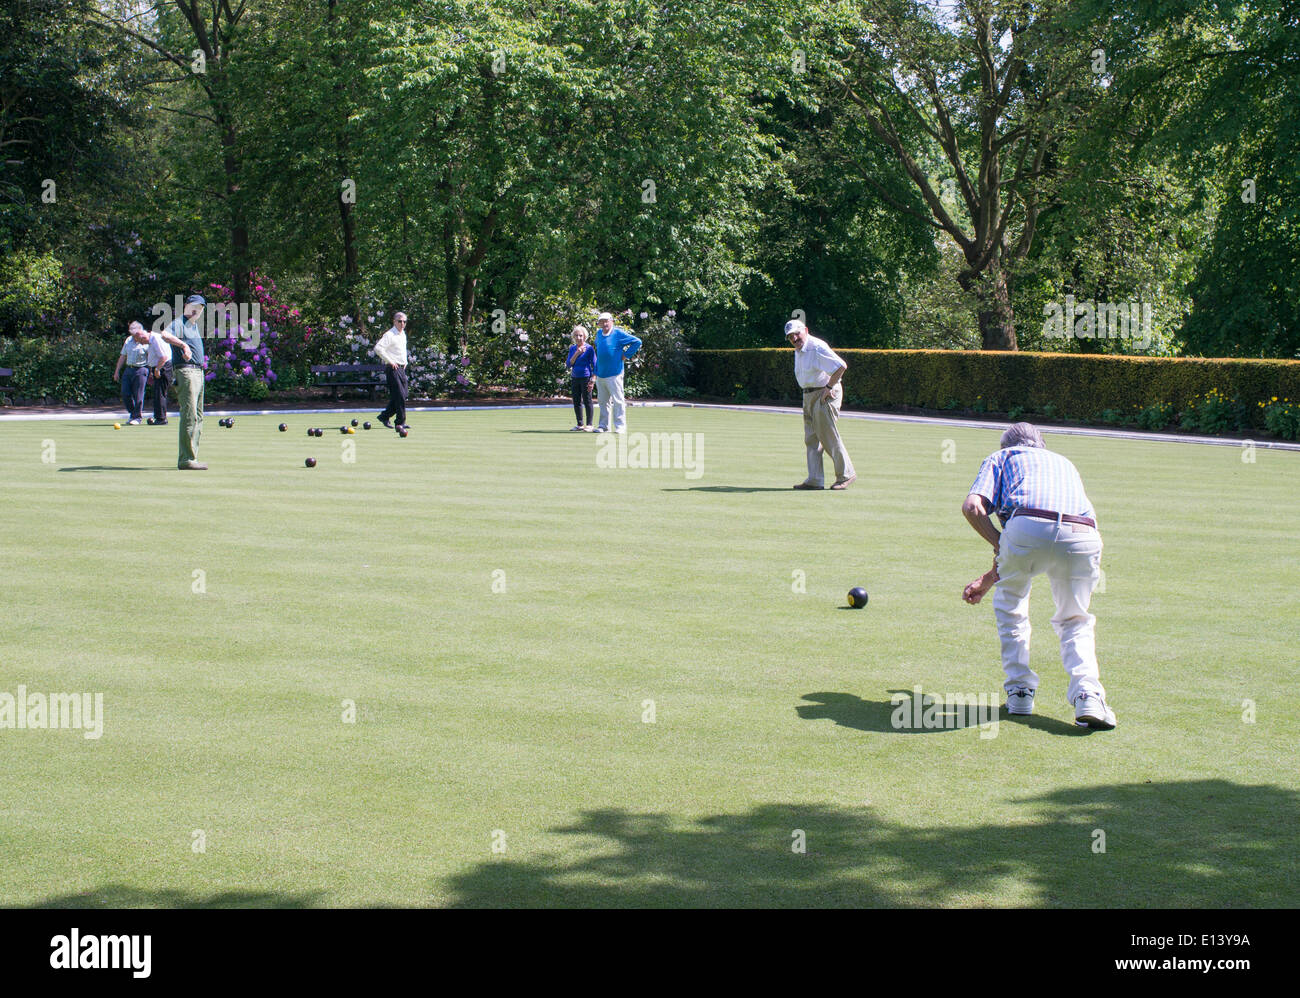 People playing crown green bowls in Roundhay Park, Leeds, West Yorkshire, England, UK Stock Photo